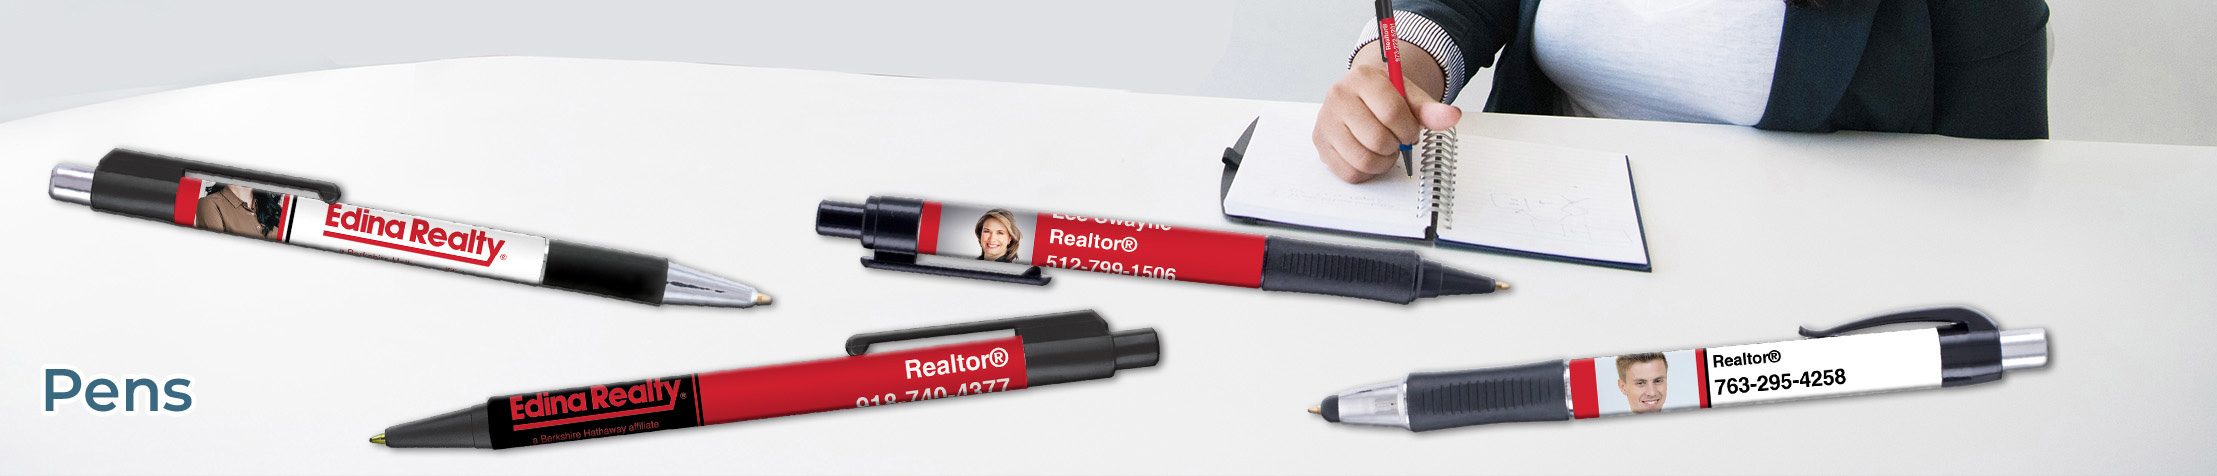 Edina Realty Real Estate Personalized Pens - promotional products: Grip Write Pens, Colorama Pens, Vision Touch Pens, and Colorama Grip Pens | BestPrintBuy.com